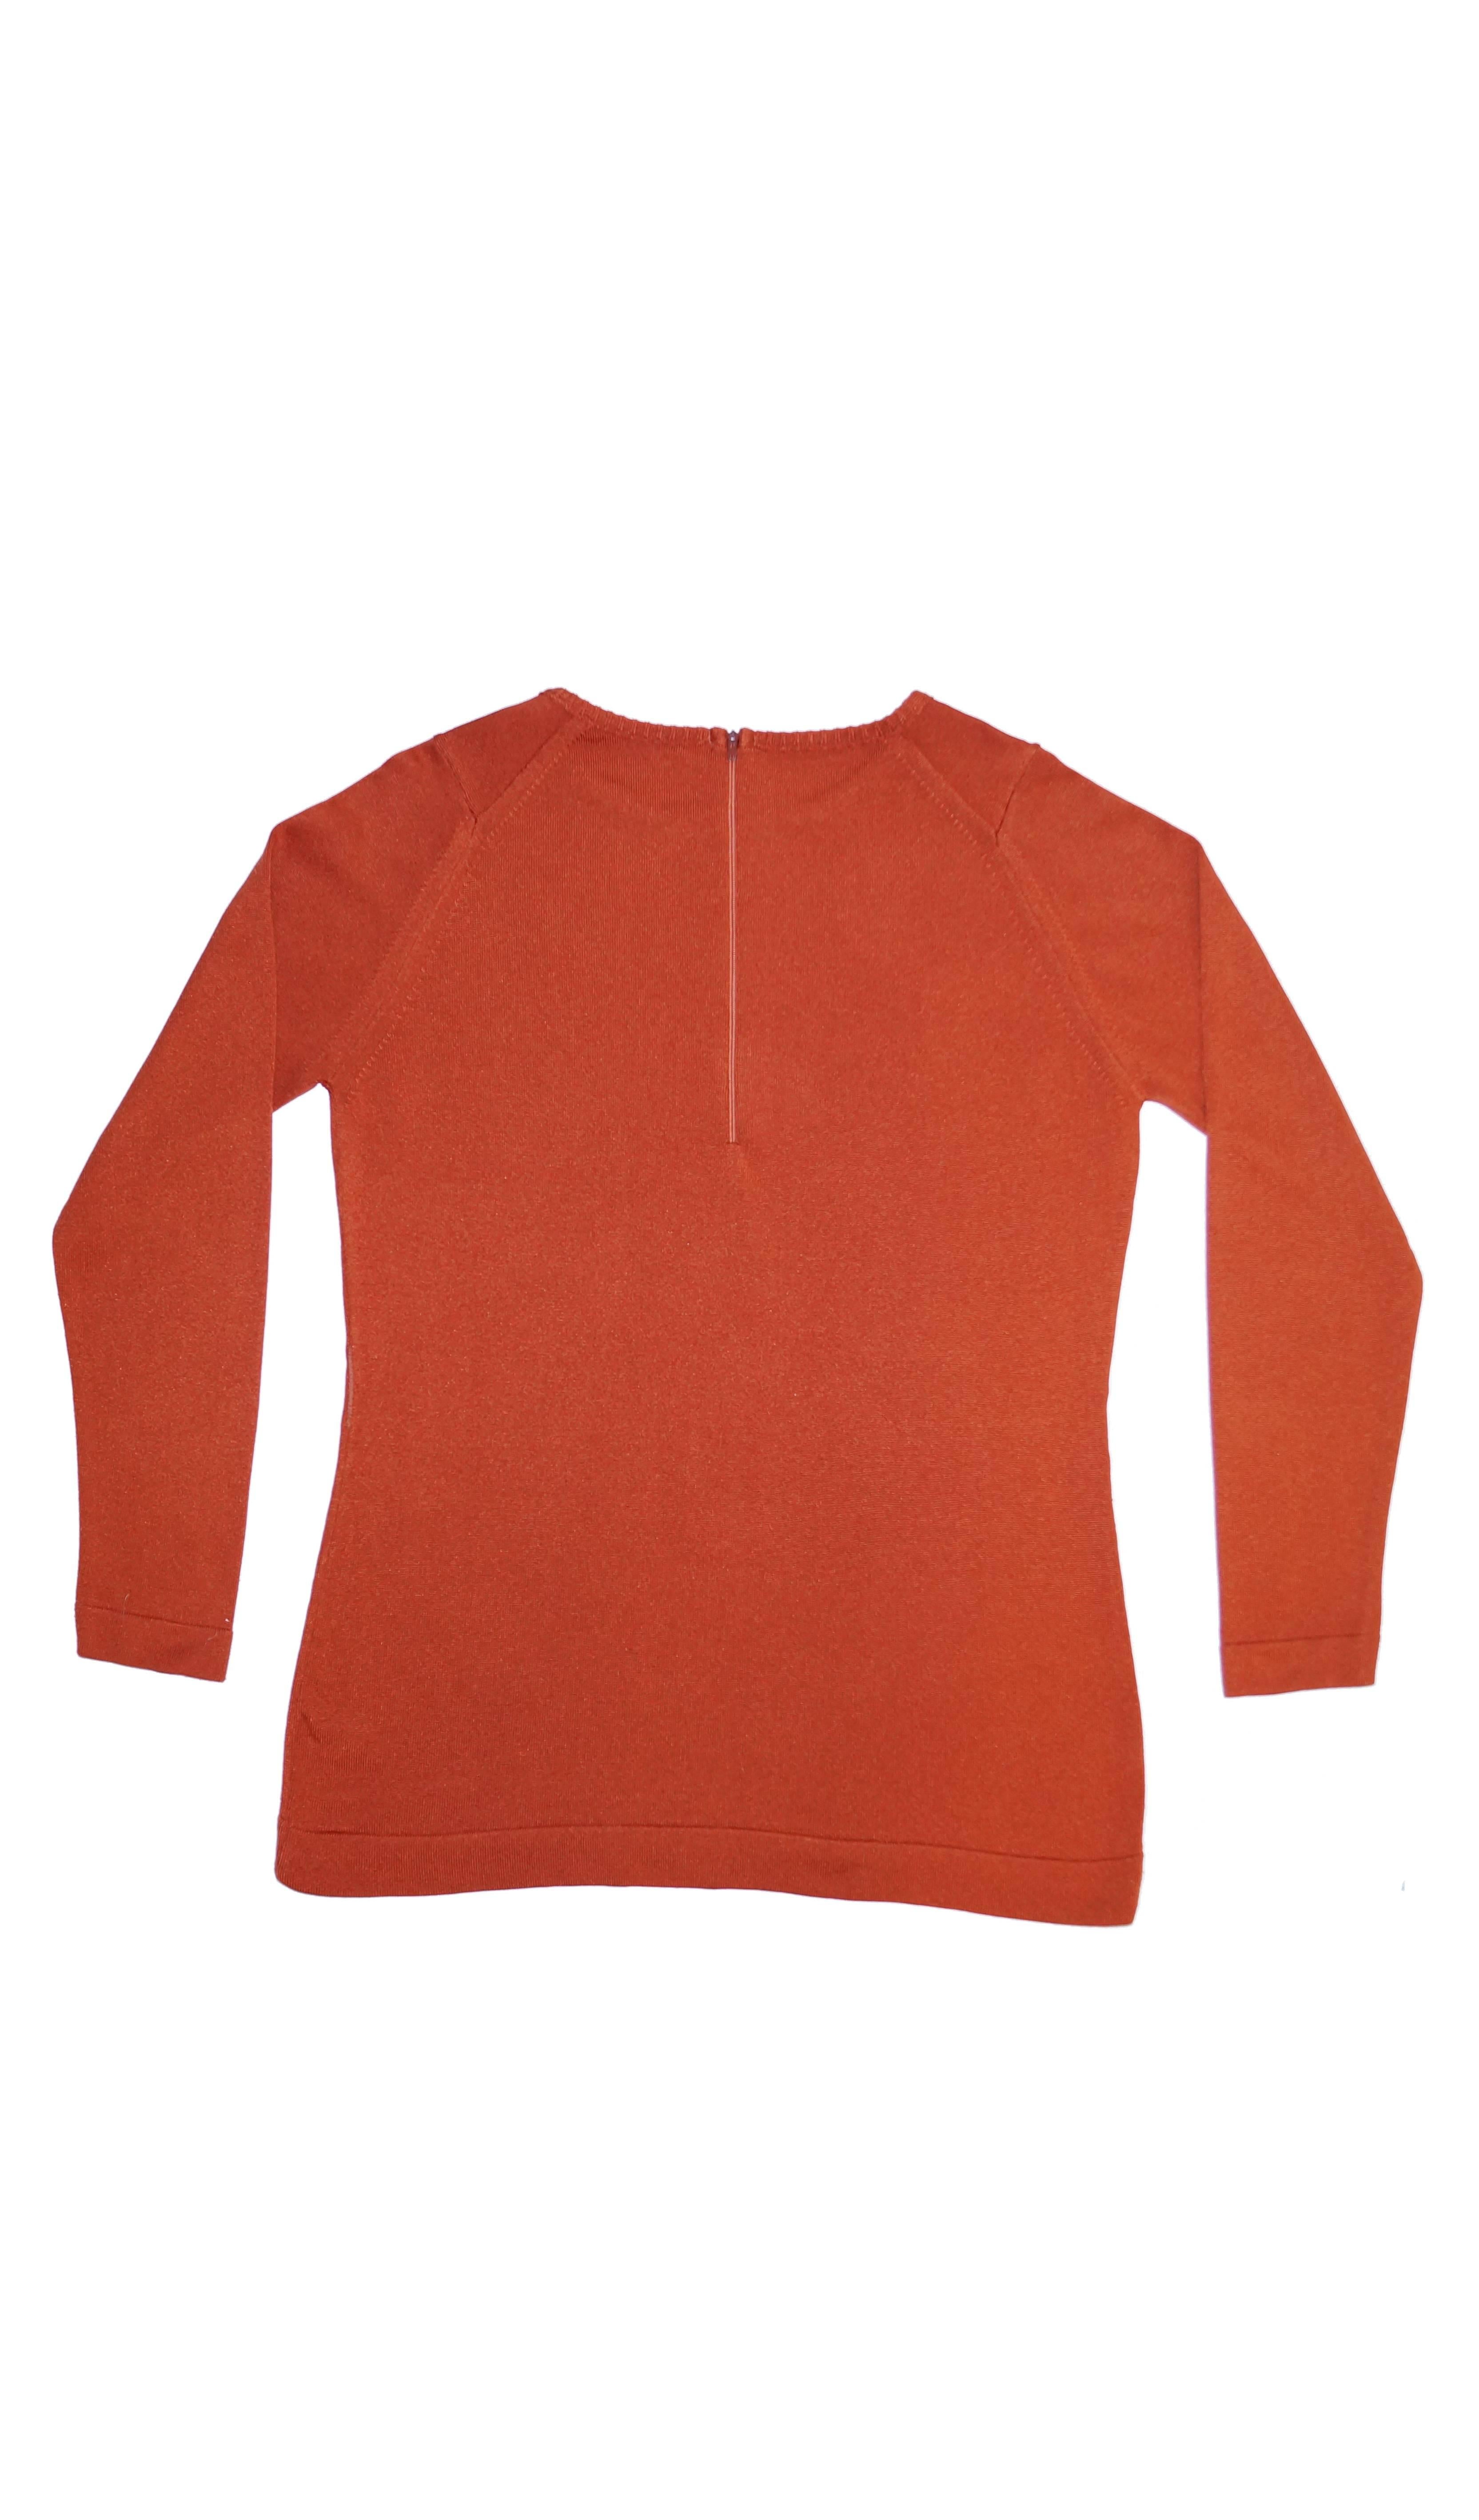 Givenchy Sport Tangerine Orange Pullover Sweater, 1970s  6